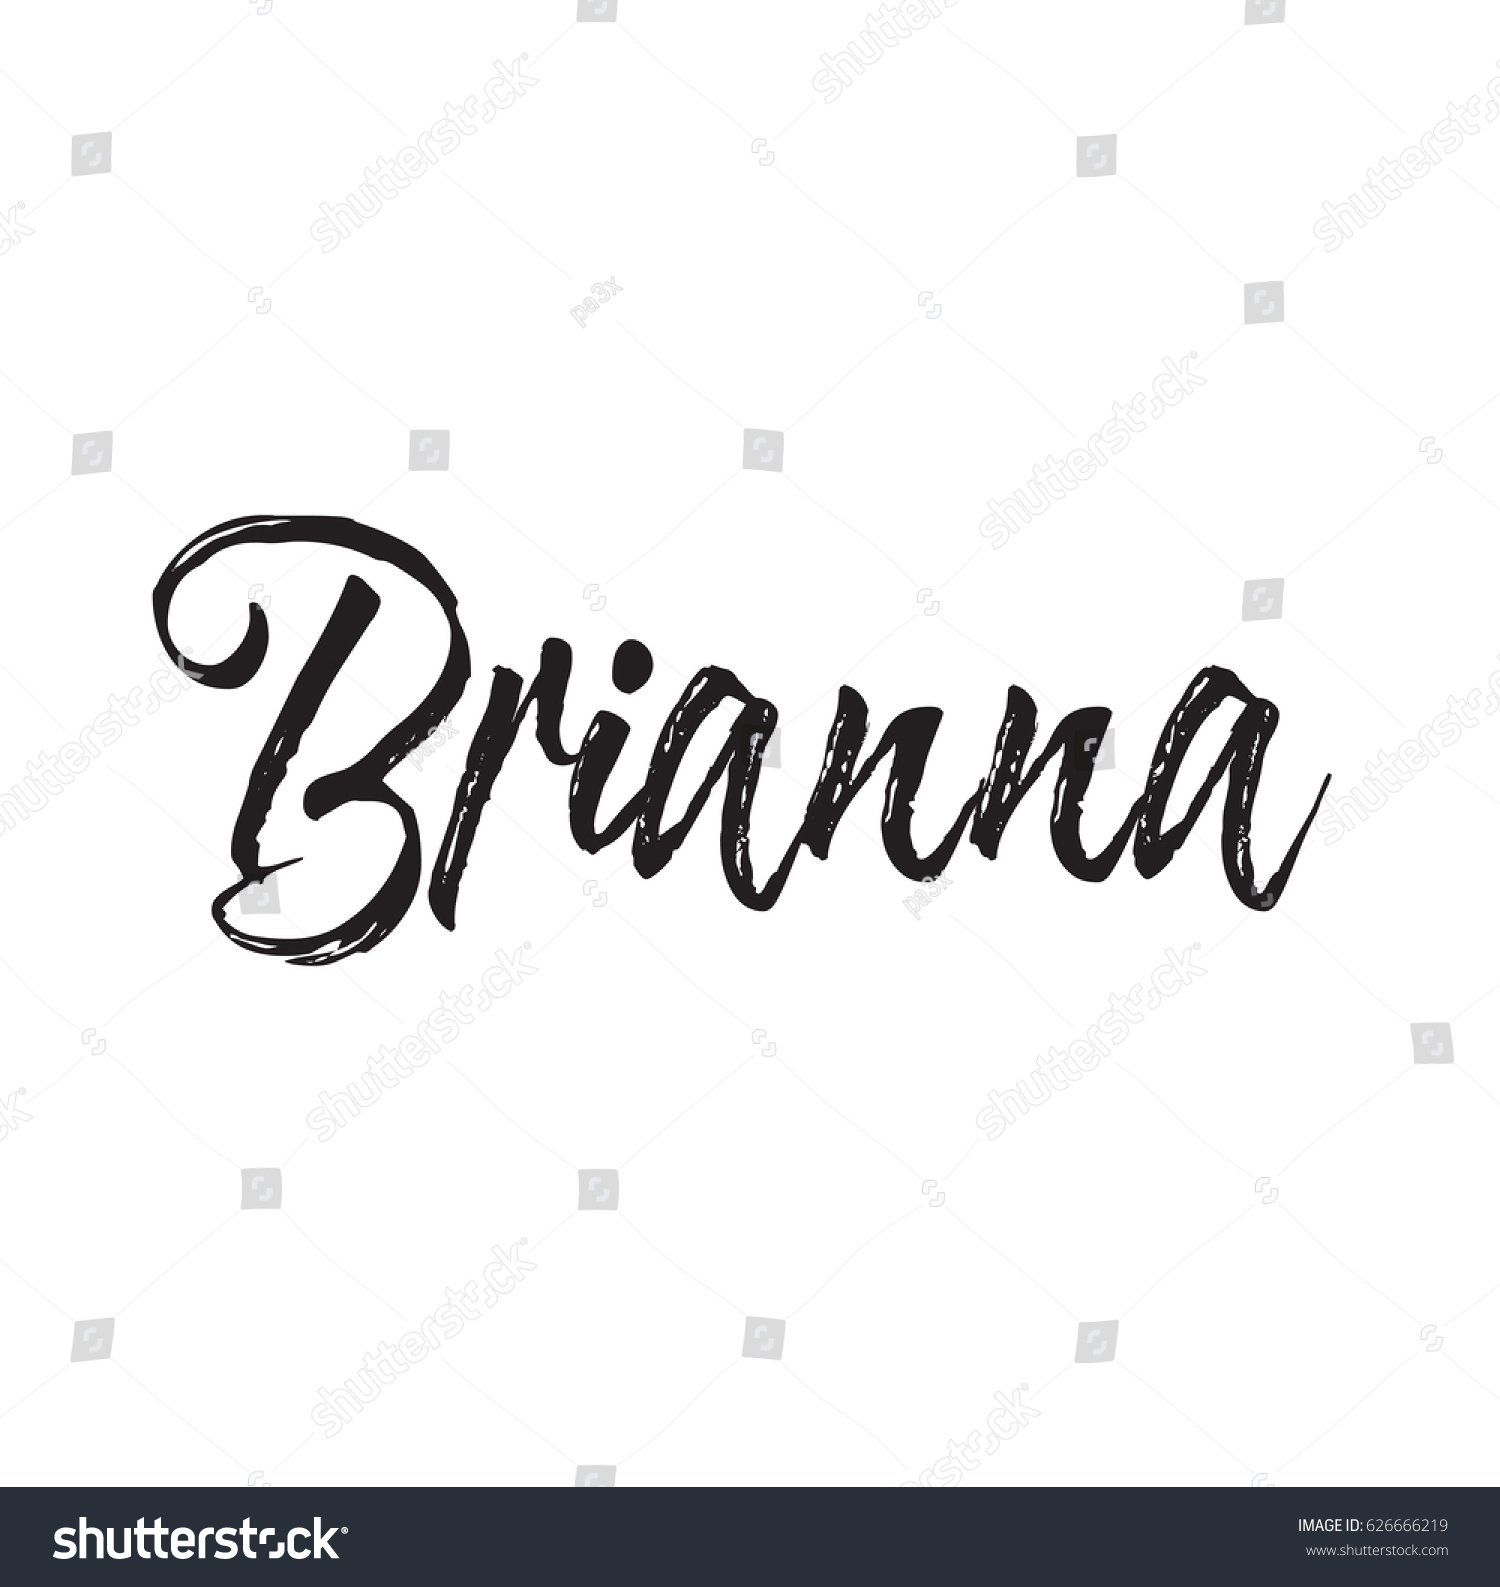 Brianna Text Design Vector Calligraphy Typography Stock